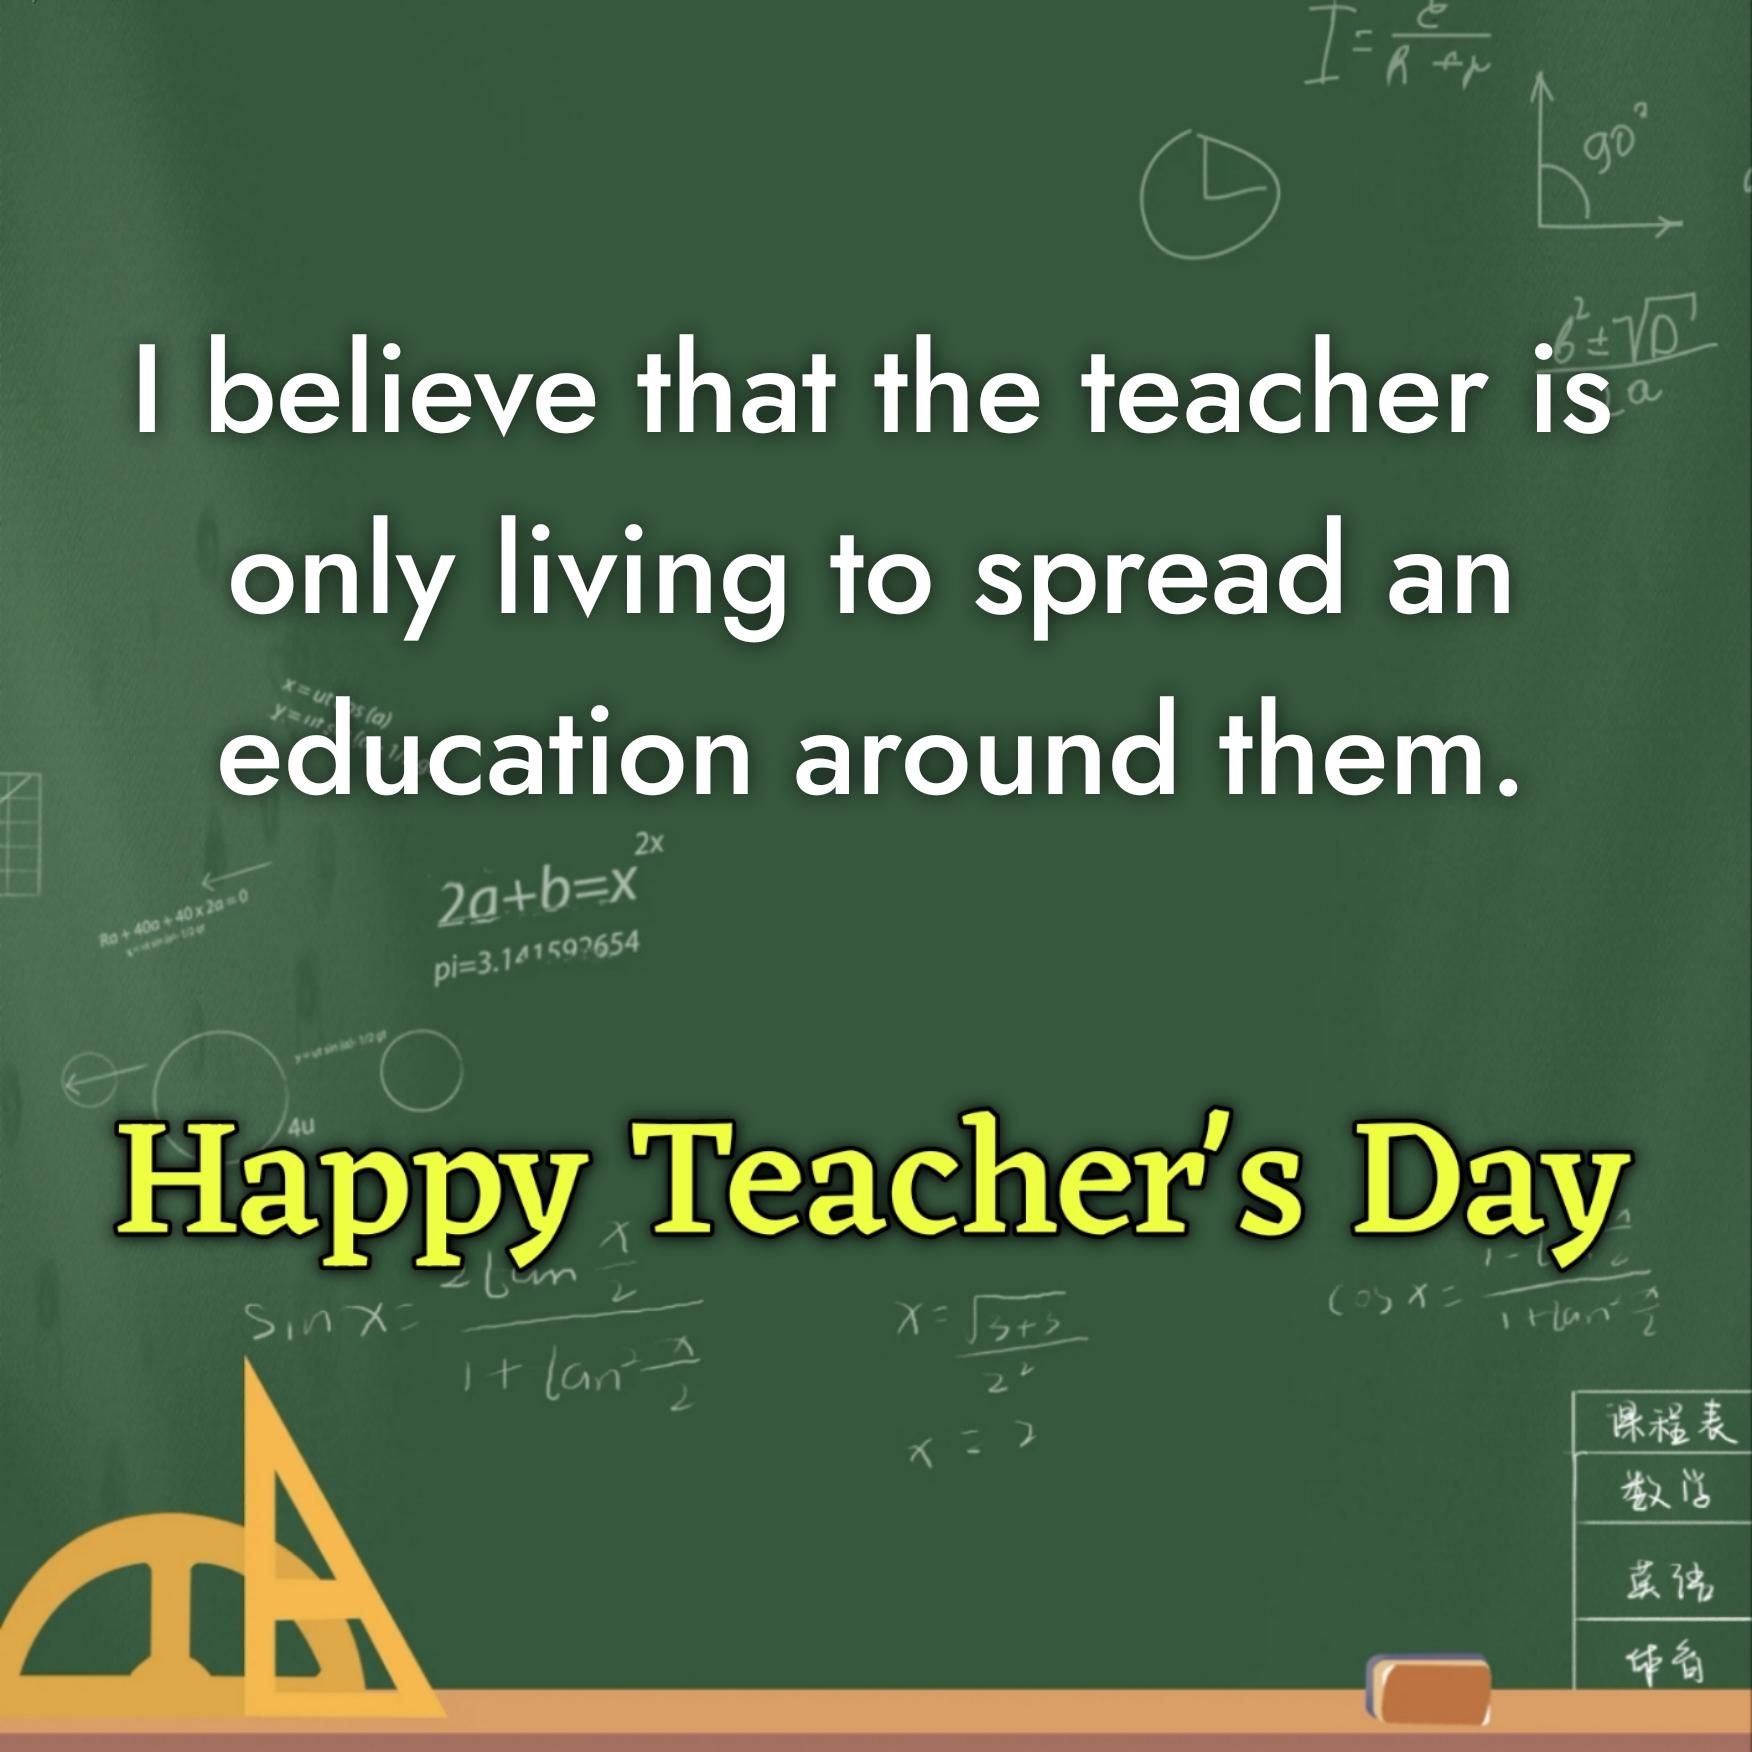 I believe that the teacher is only living to spread